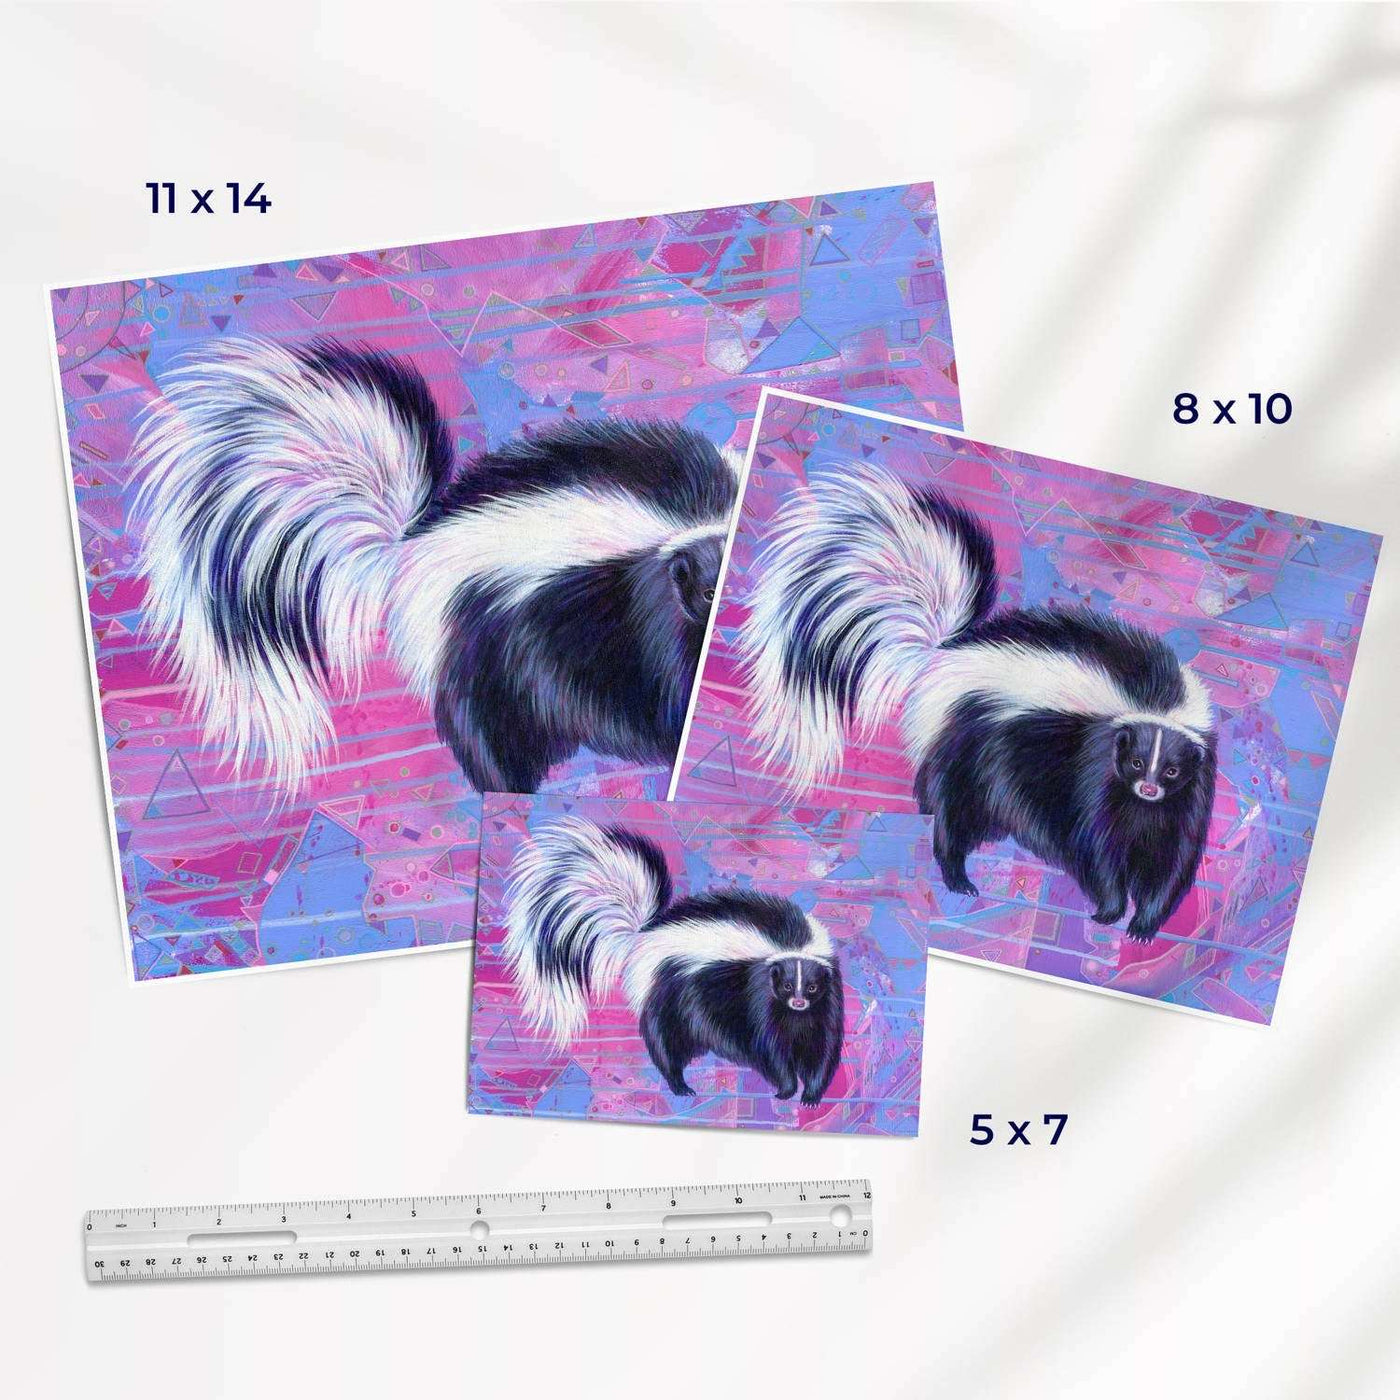 Three skunk fine art prints from the Trash Animals - Fine Art Print Bundle of different sizes (11x14, 8x10, 5x7) featuring vibrant pink and purple backgrounds, displayed with a ruler for scale.